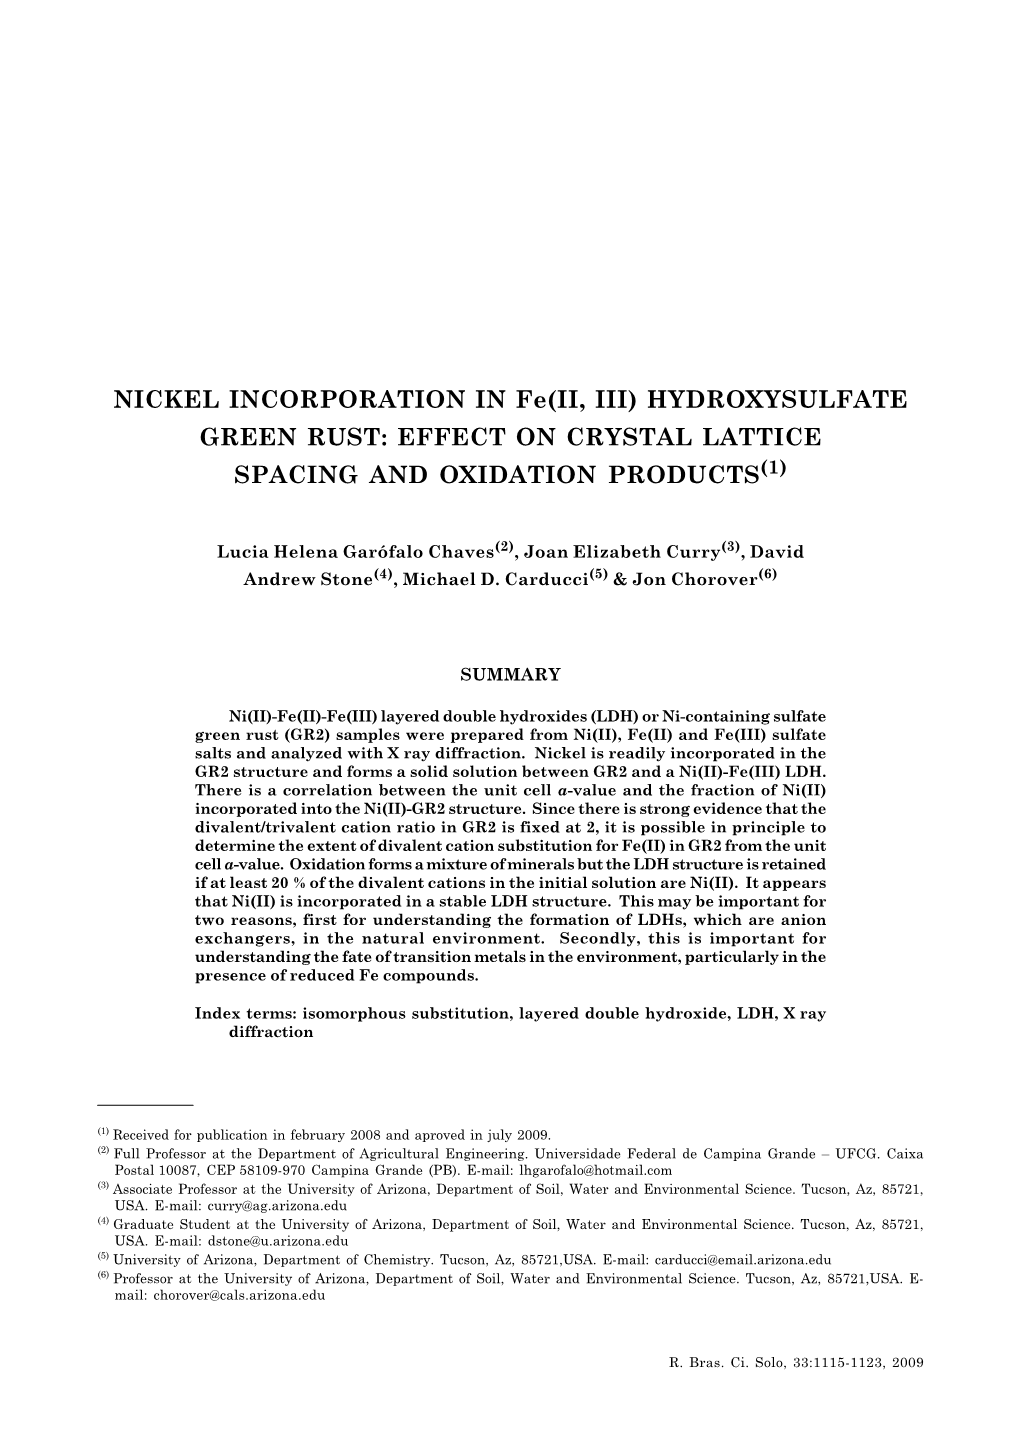 NICKEL INCORPORATION in Fe(II, III) HYDROXYSULFATE GREEN RUST: EFFECT on CRYSTAL LATTICE SPACING and OXIDATION PRODUCTS(1)